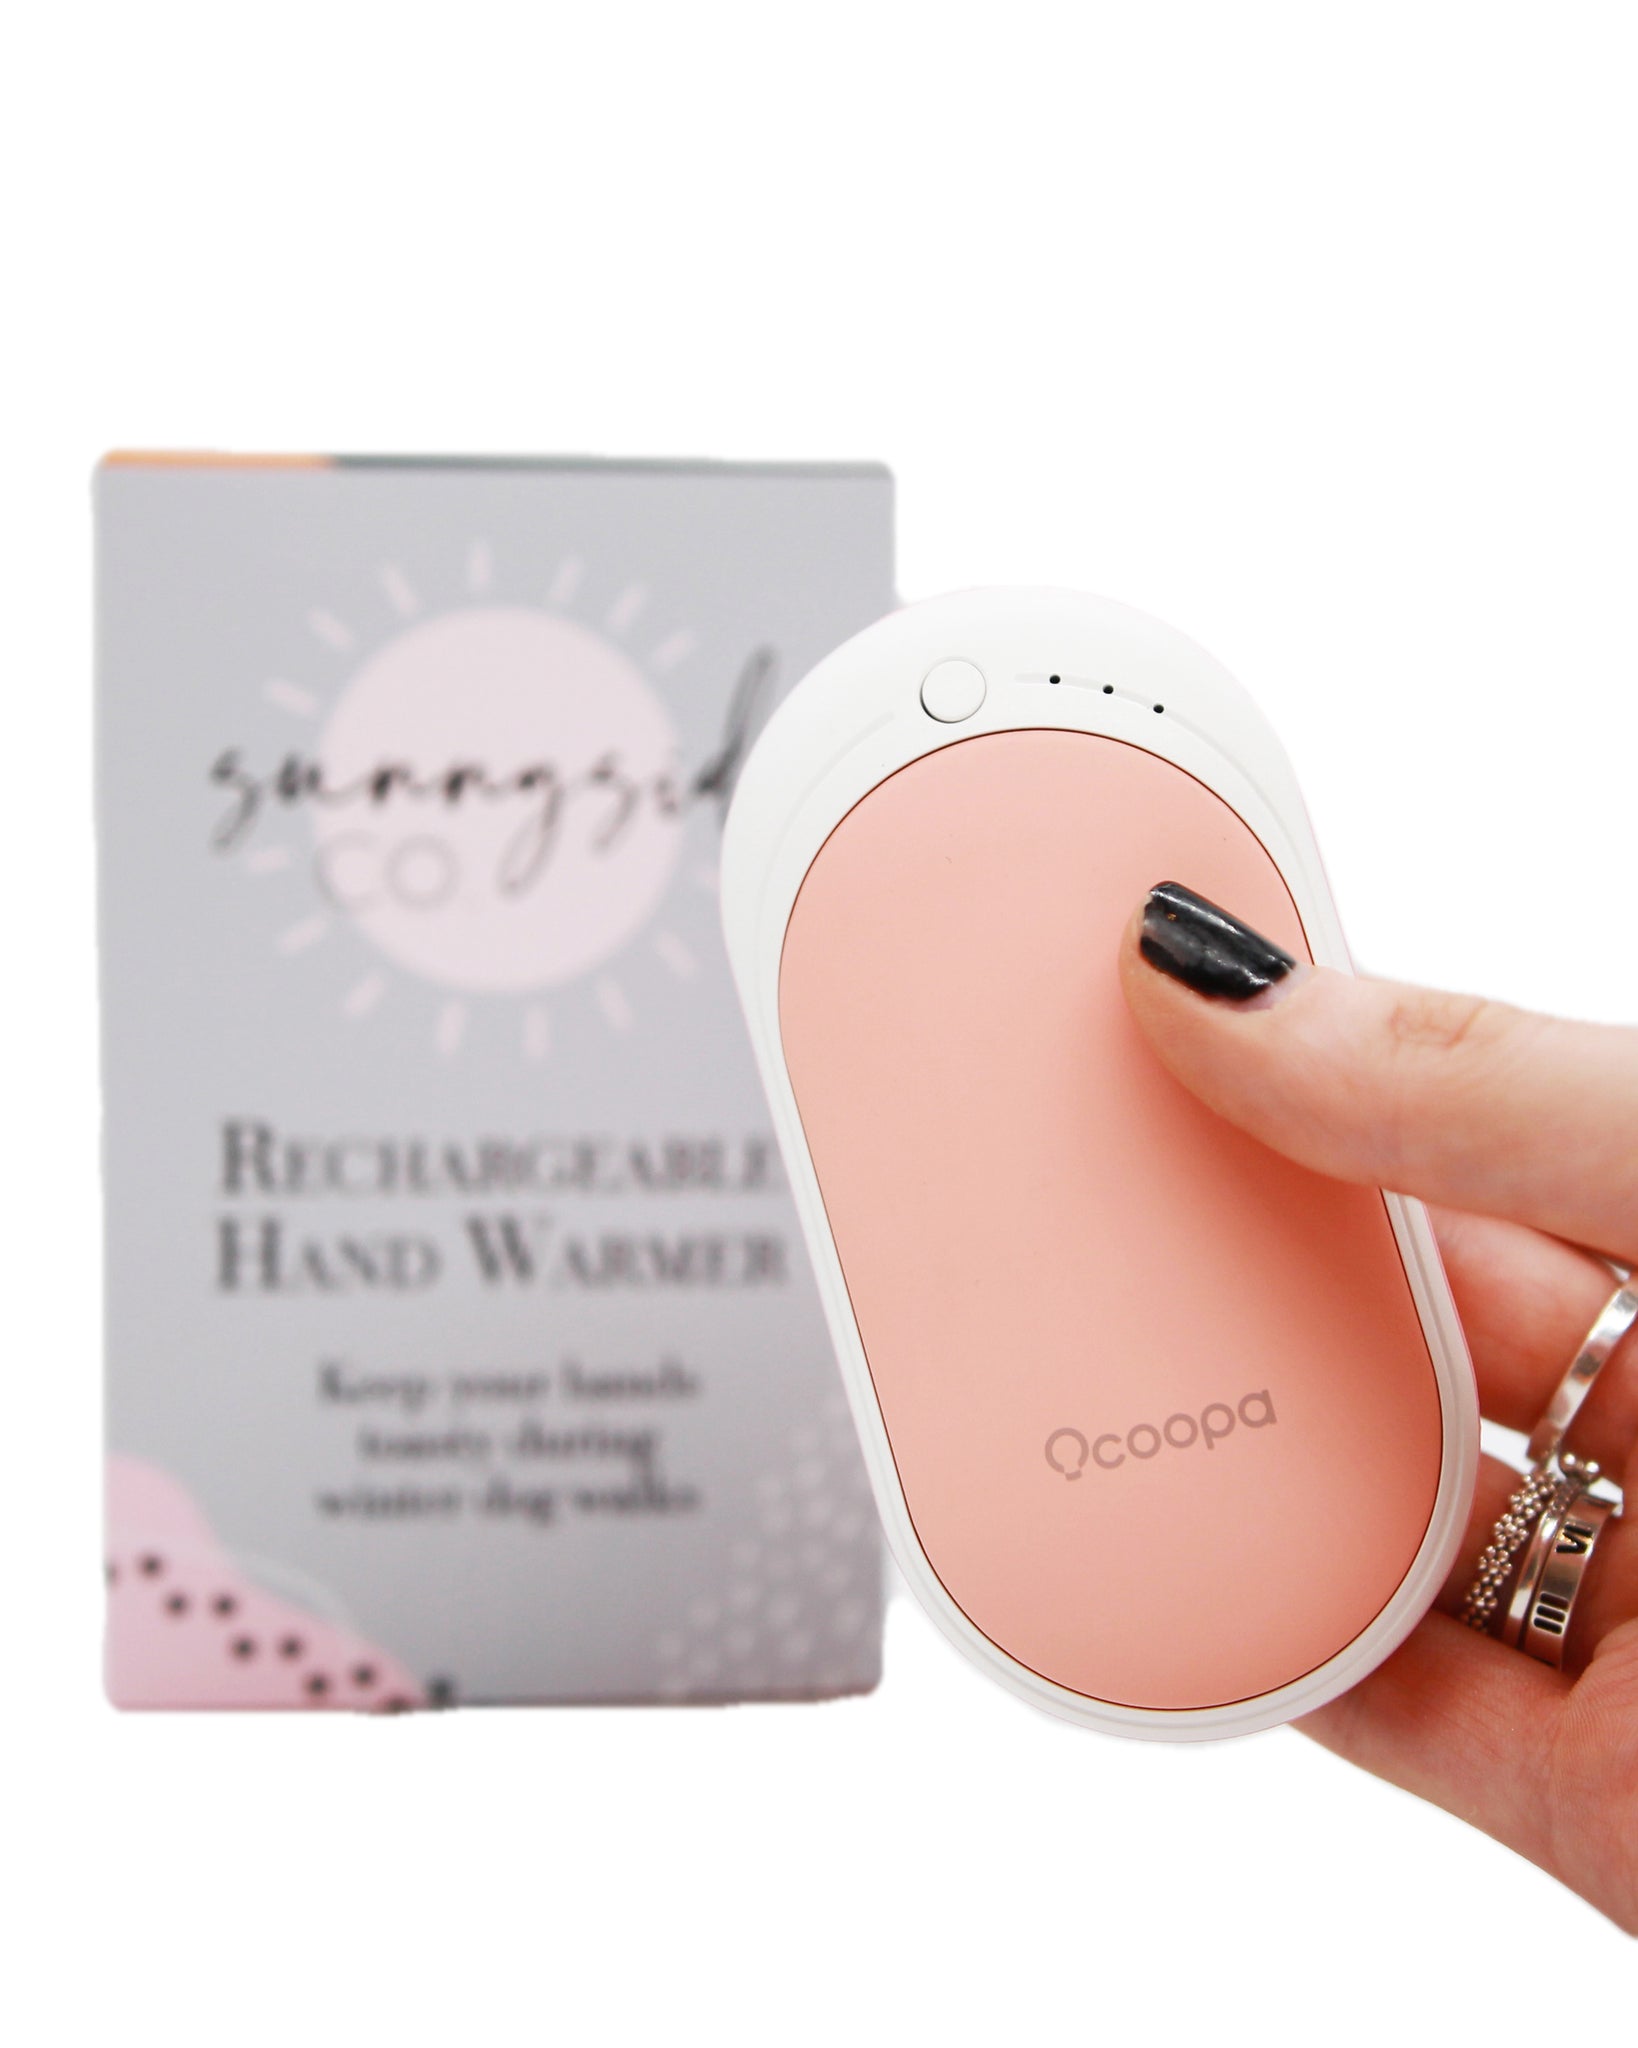 Rechargeable Hand Warmer - PINK – Sunnyside Co